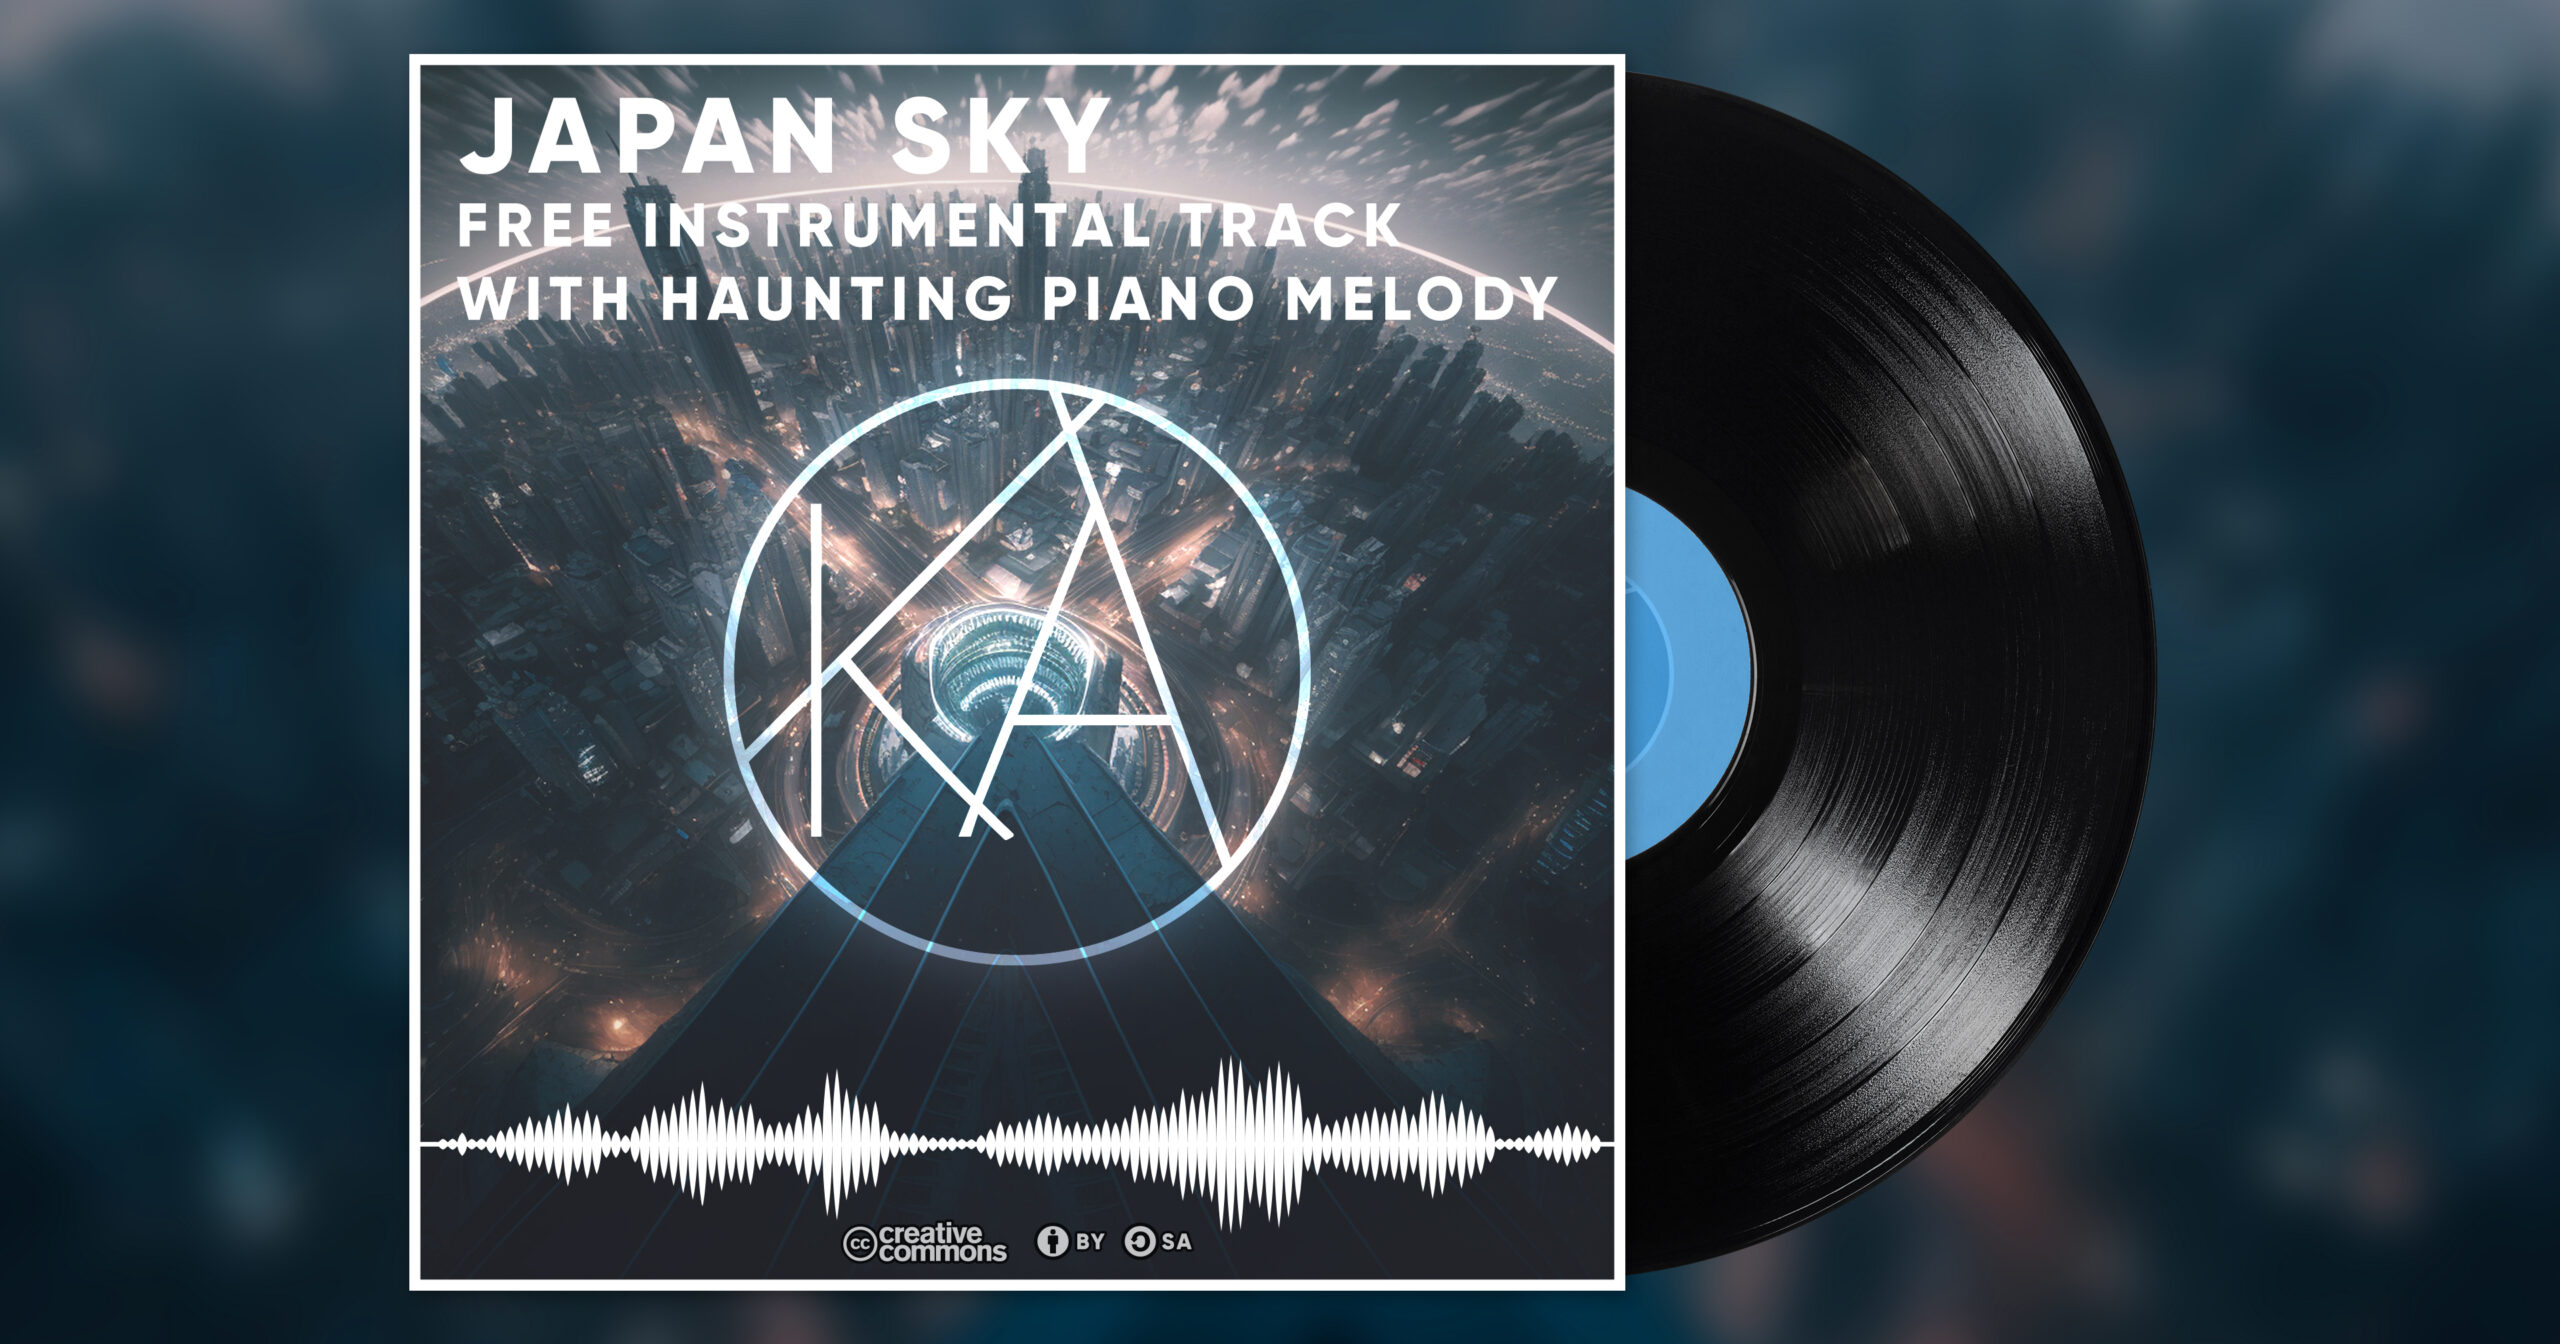 "Japan Sky" is a beautiful and evocative instrumental track that will transport you to a world of mystery and tension.